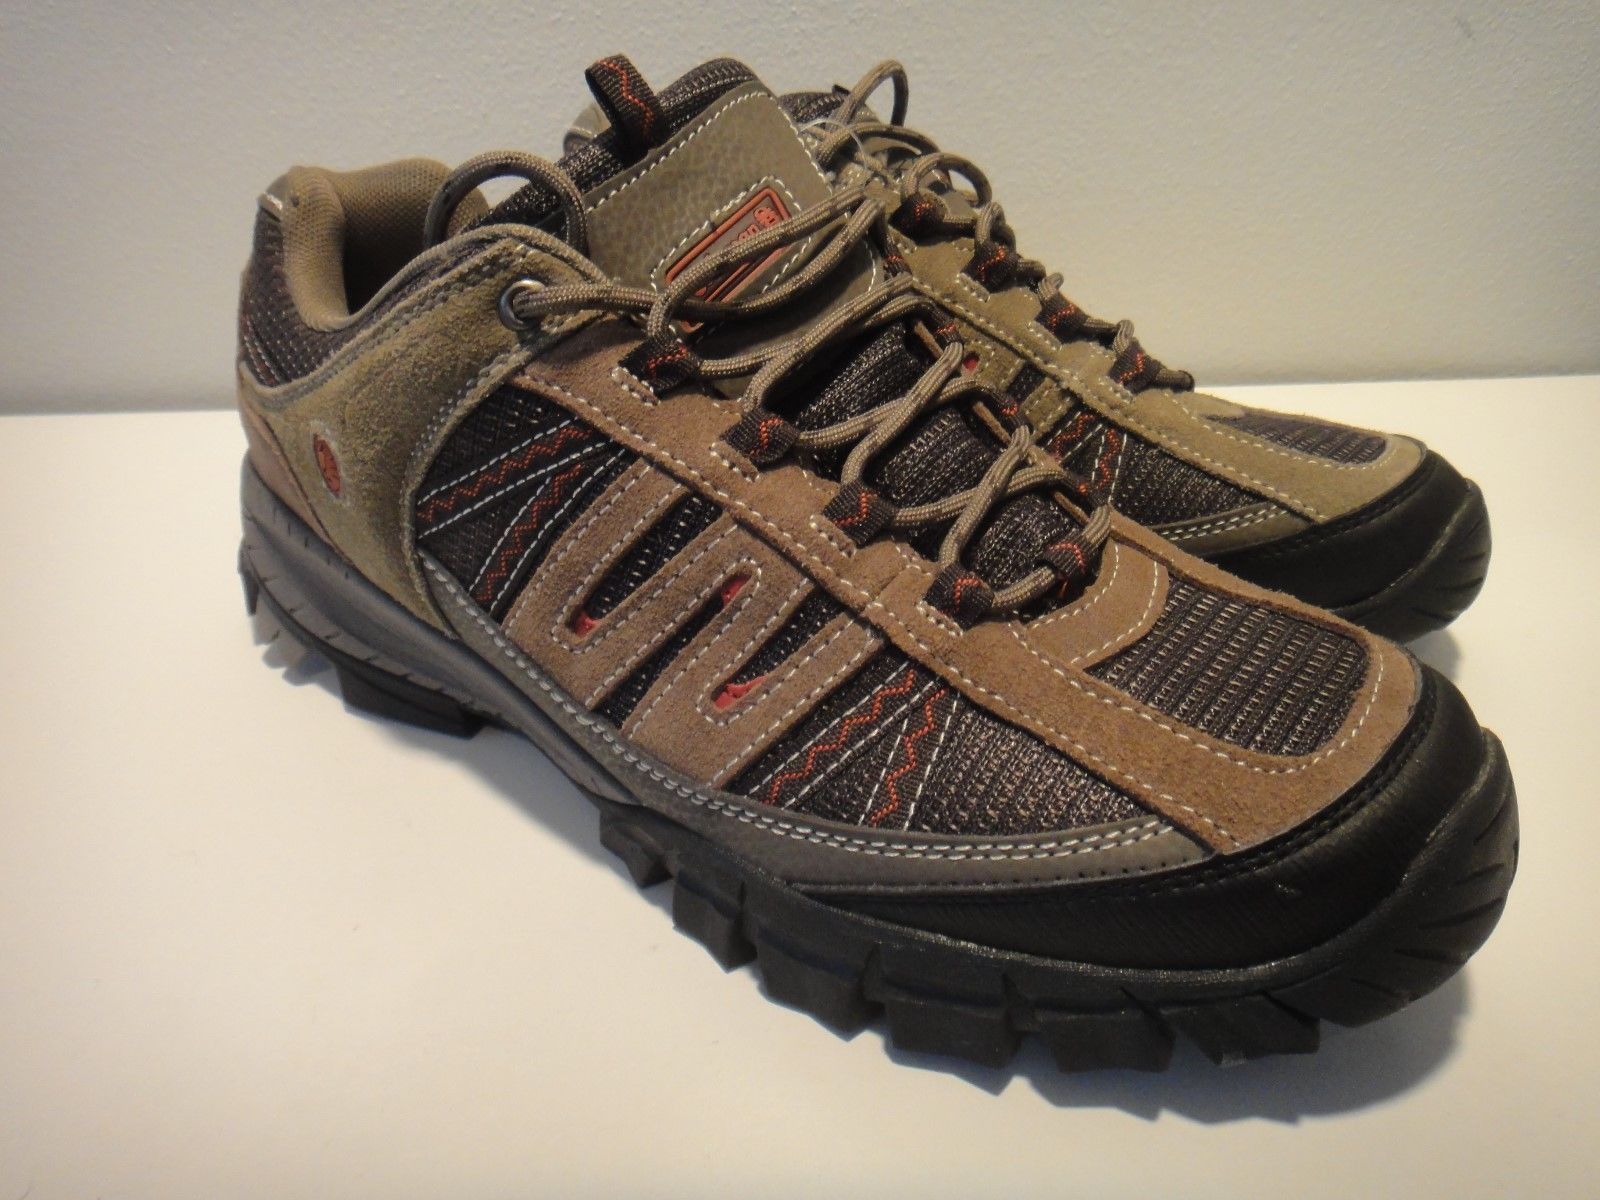 Coleman Tasman Outdoor Shoes 75226 12 Medium Shoes For Outdoor Camping ...